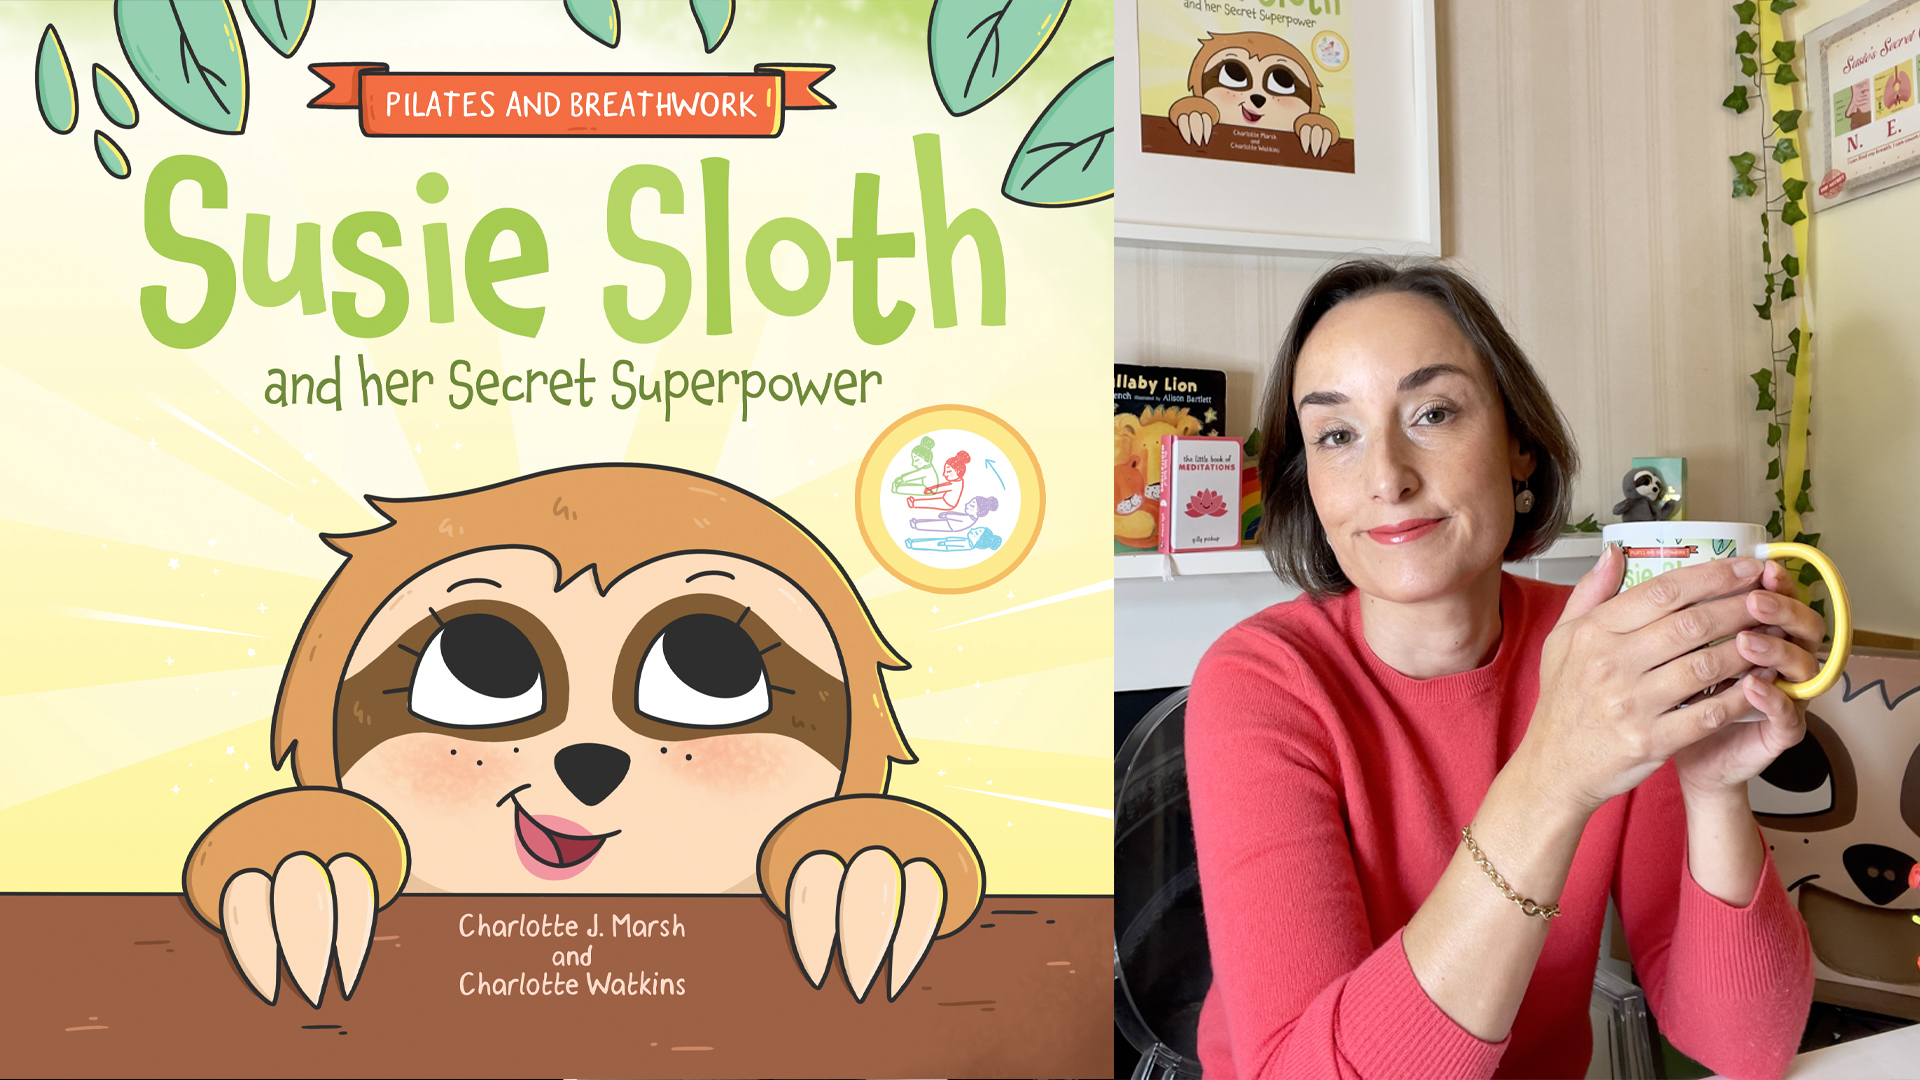 Charlotte J Marsh: Susie Sloth and her Secret Superpower